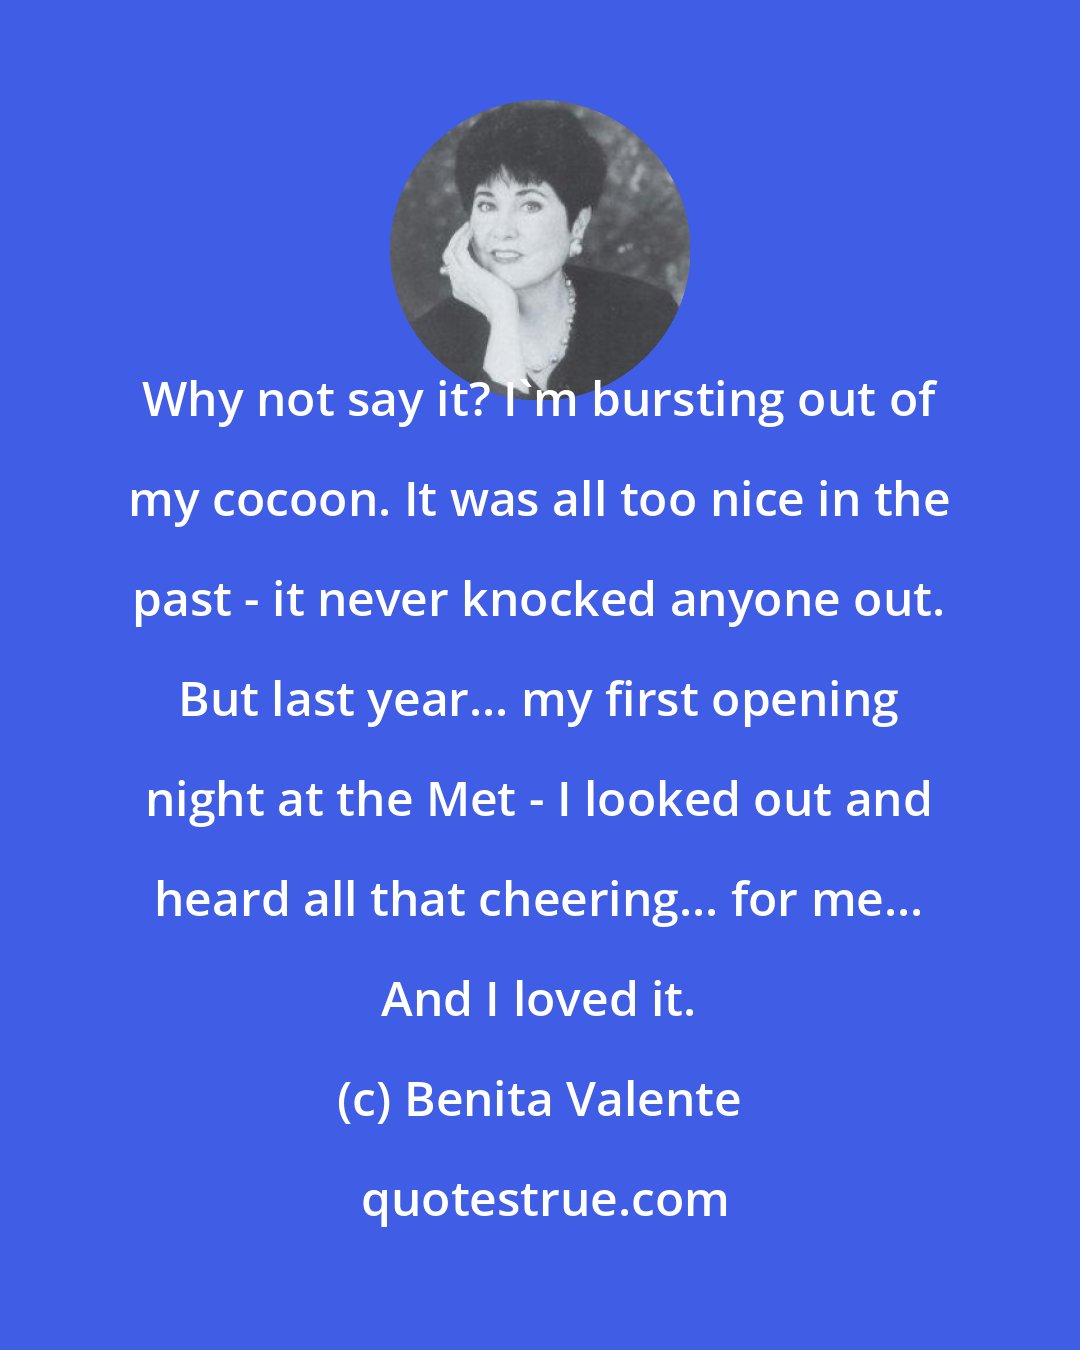 Benita Valente: Why not say it? I'm bursting out of my cocoon. It was all too nice in the past - it never knocked anyone out. But last year... my first opening night at the Met - I looked out and heard all that cheering... for me... And I loved it.